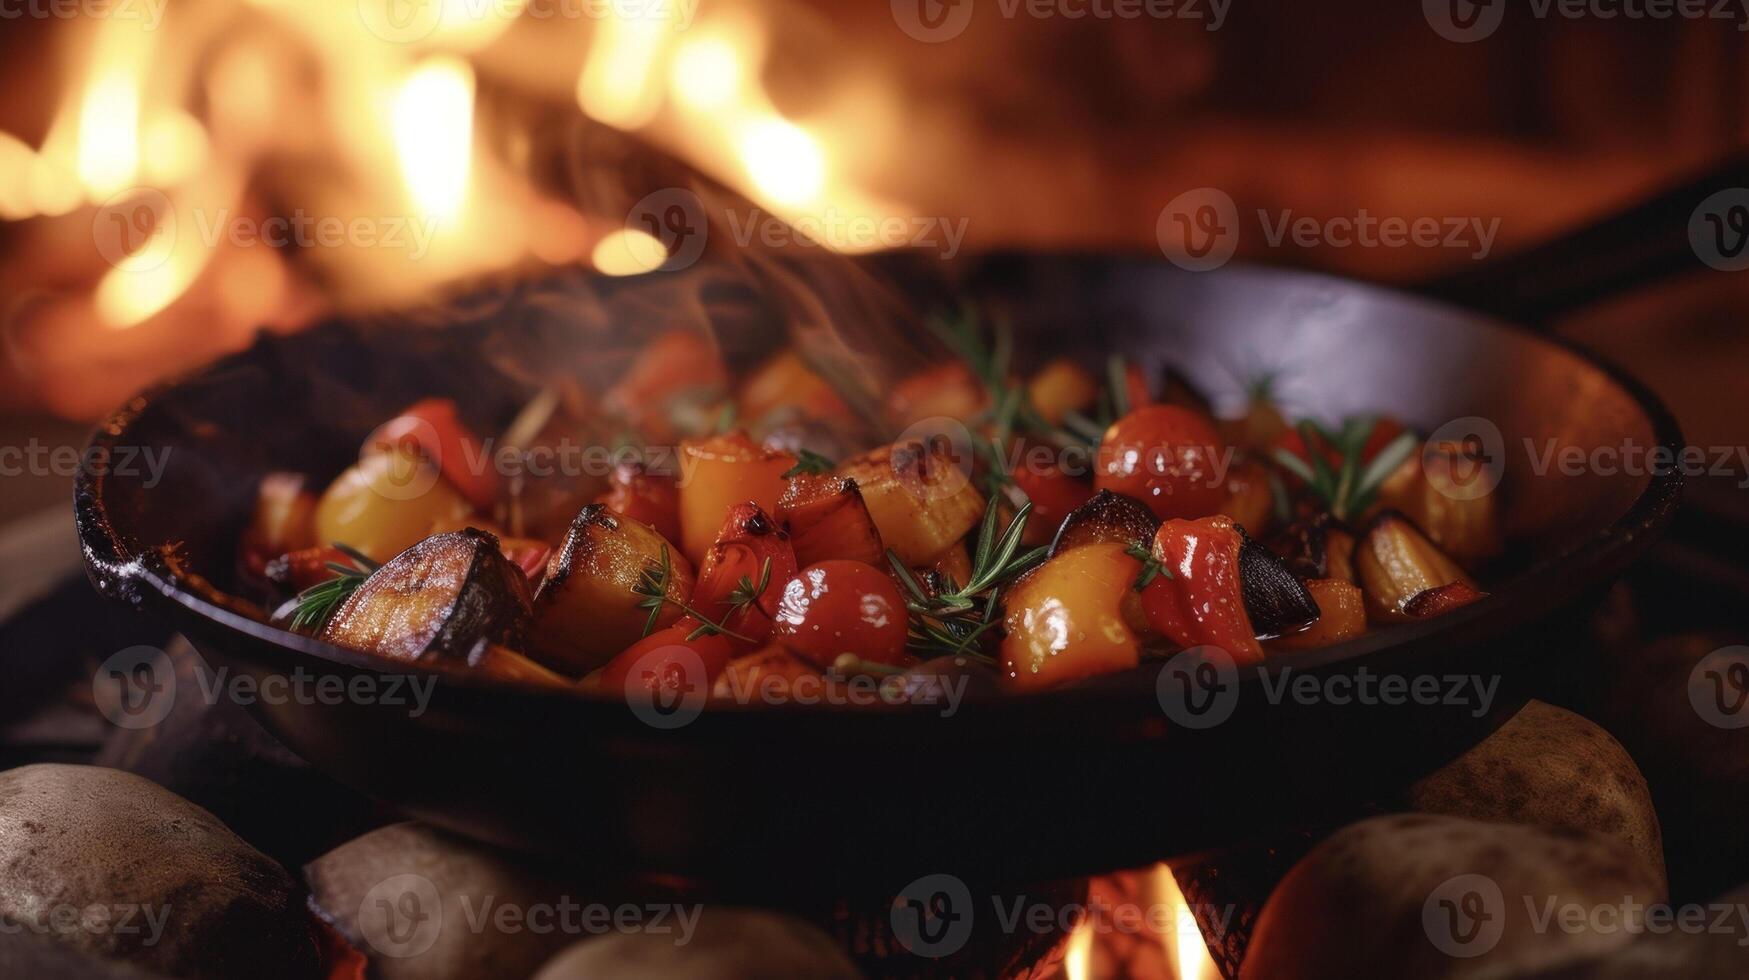 A mouthwatering mix of fireroasted vegetables lovingly cooked in a cast iron pan and served steaming hot in front of a crackling fire. This fireside dish is a hearty and deliciou photo